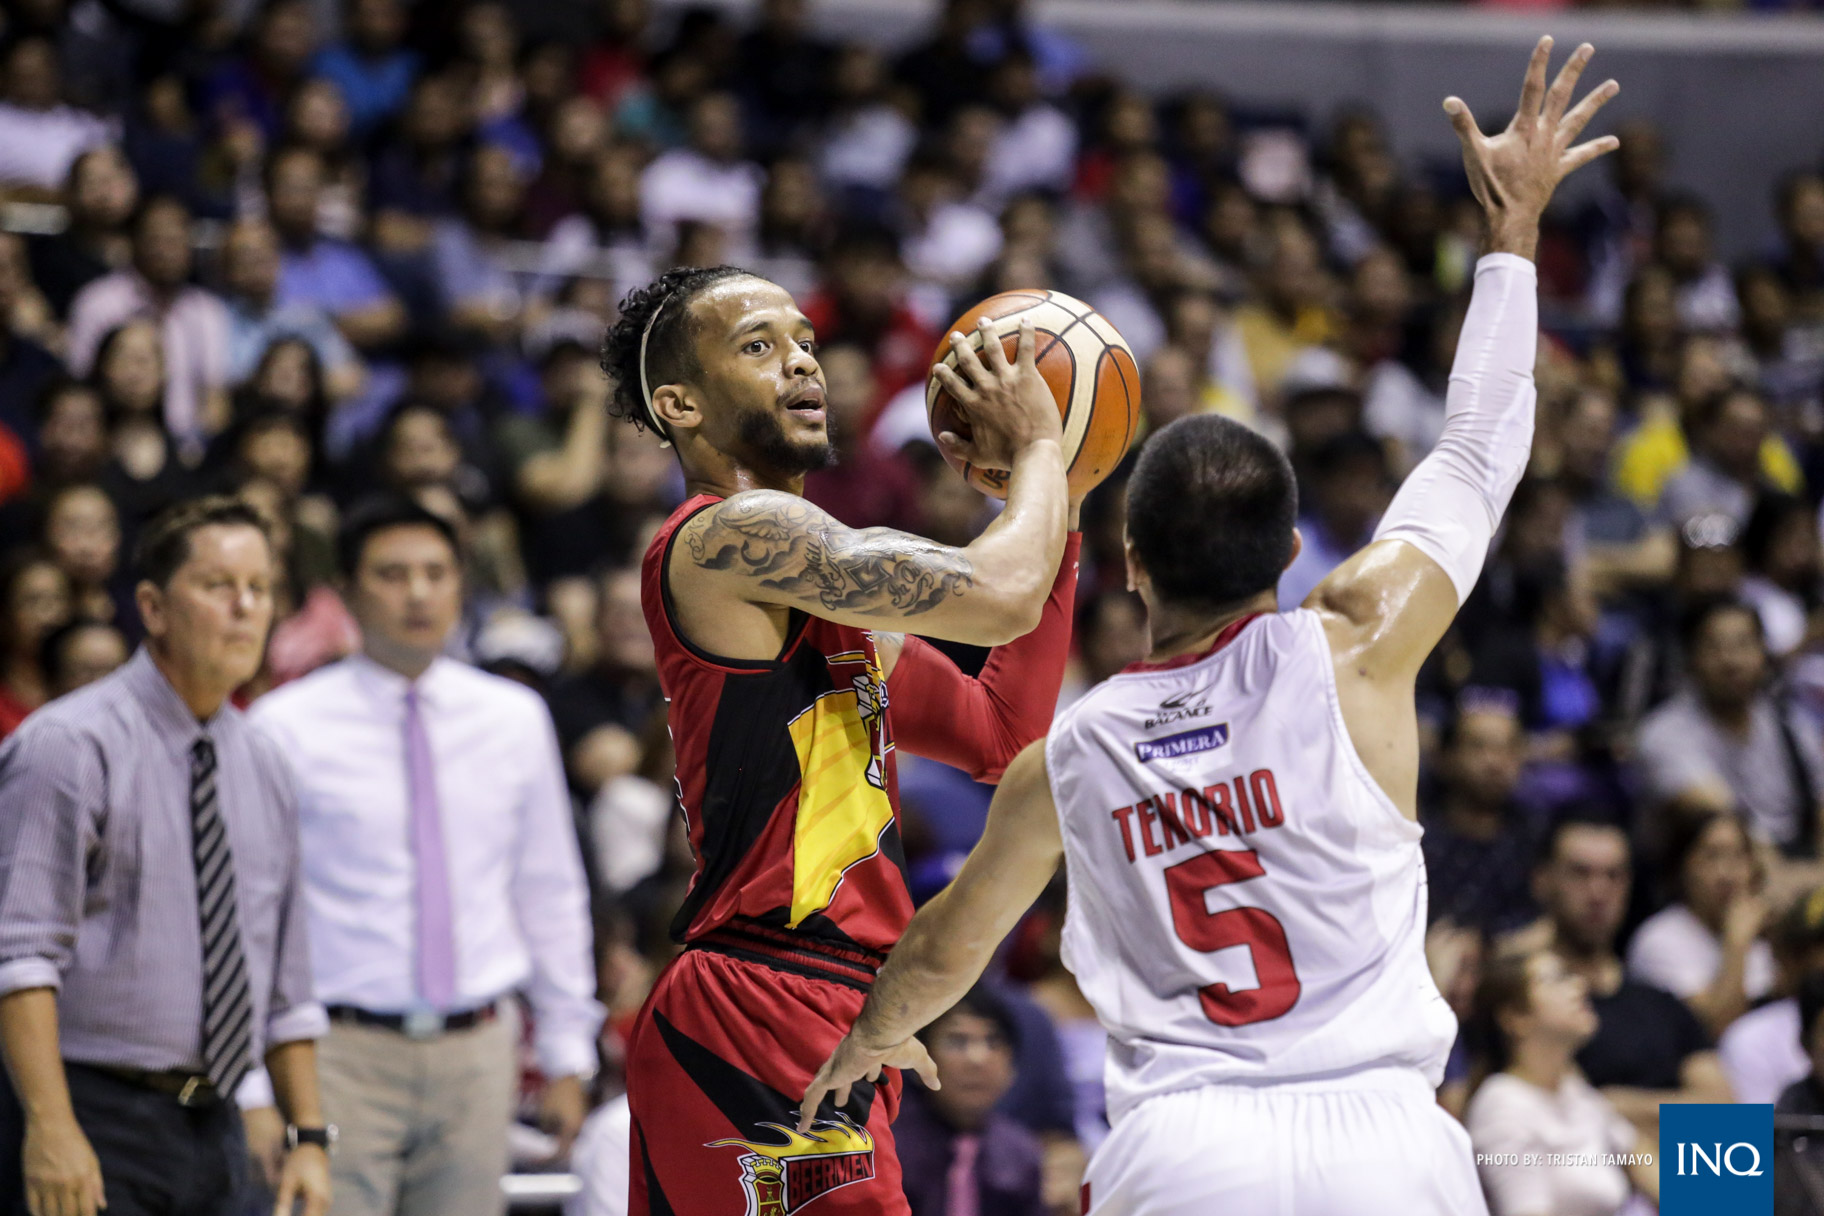 San Miguel's Chris Ross. Photo by Tristan Tamayo/INQUIRER.net